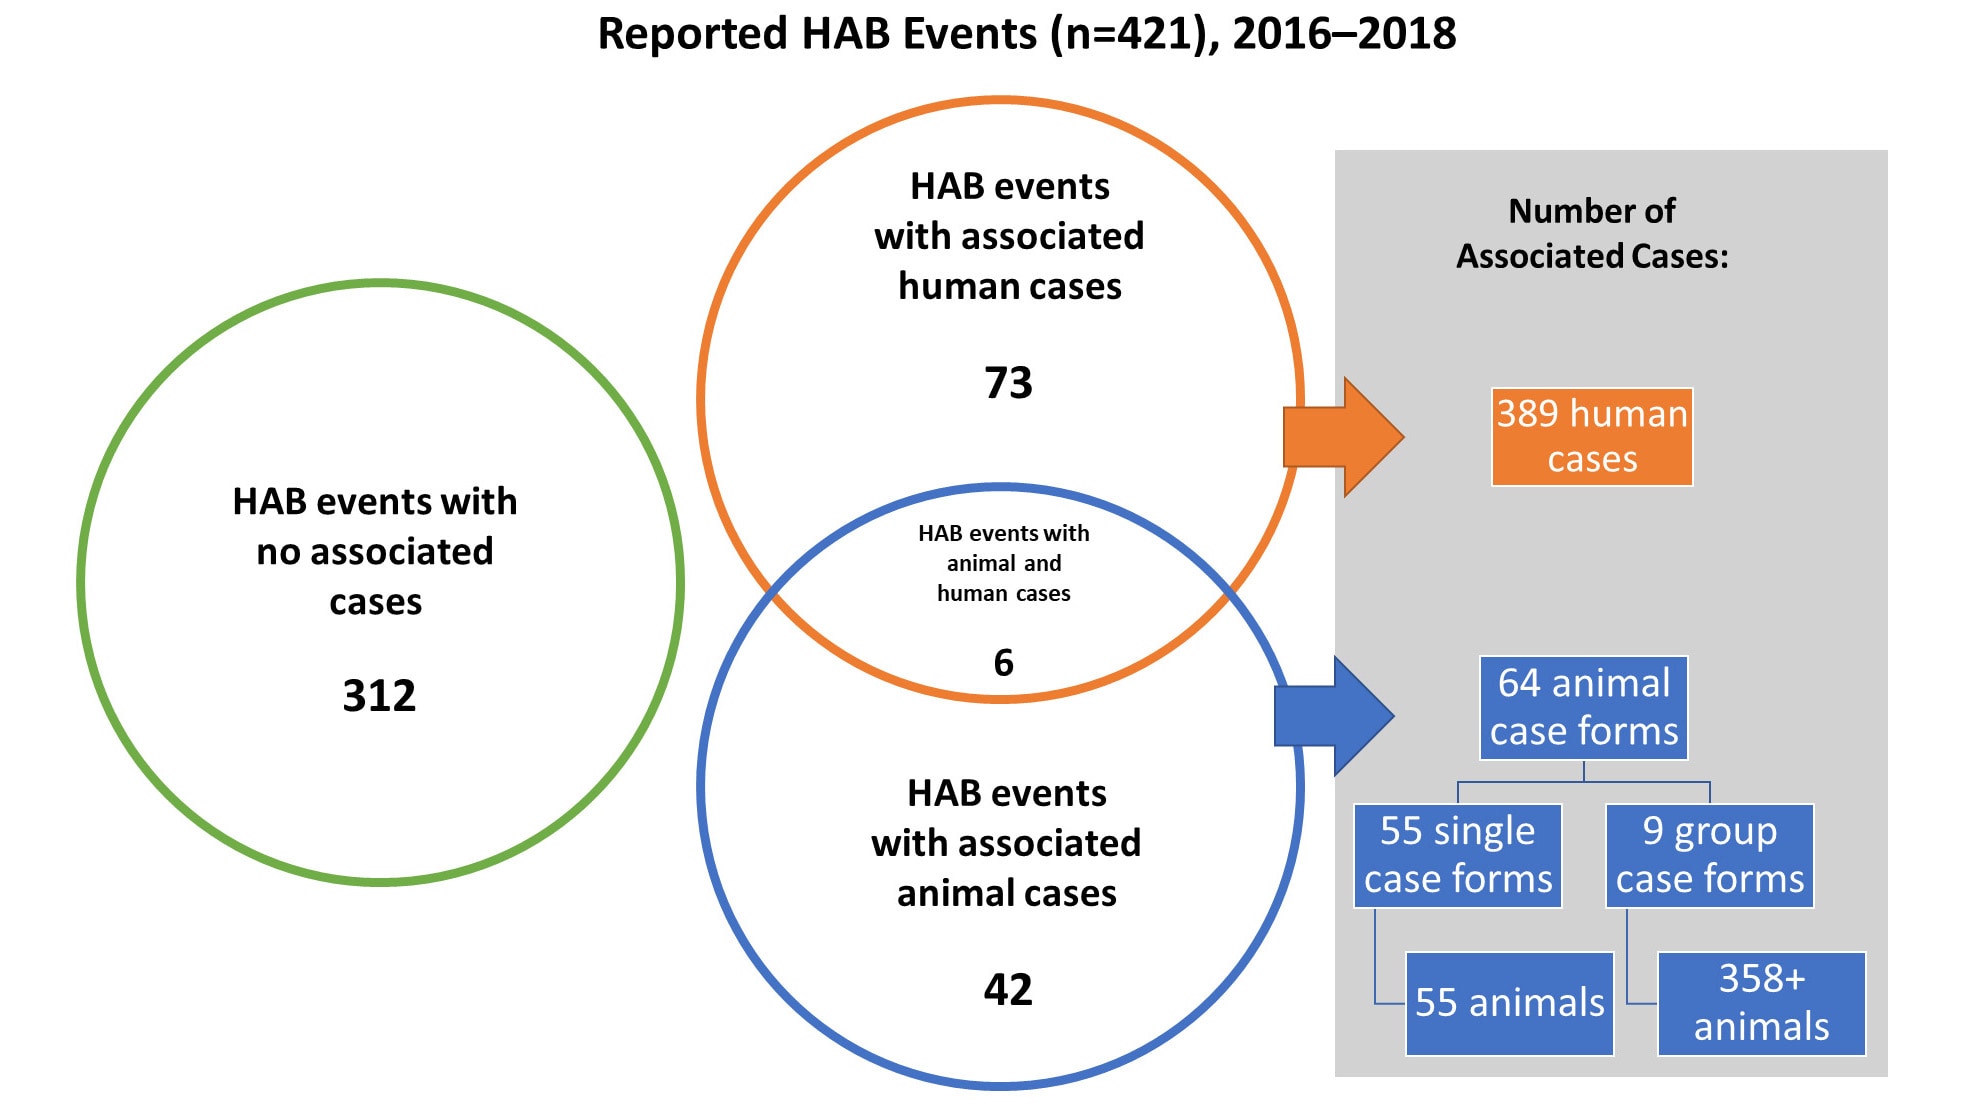 Figure showing reported HAB events (n=421) with associated human (n=73) and animal cases (n=42).